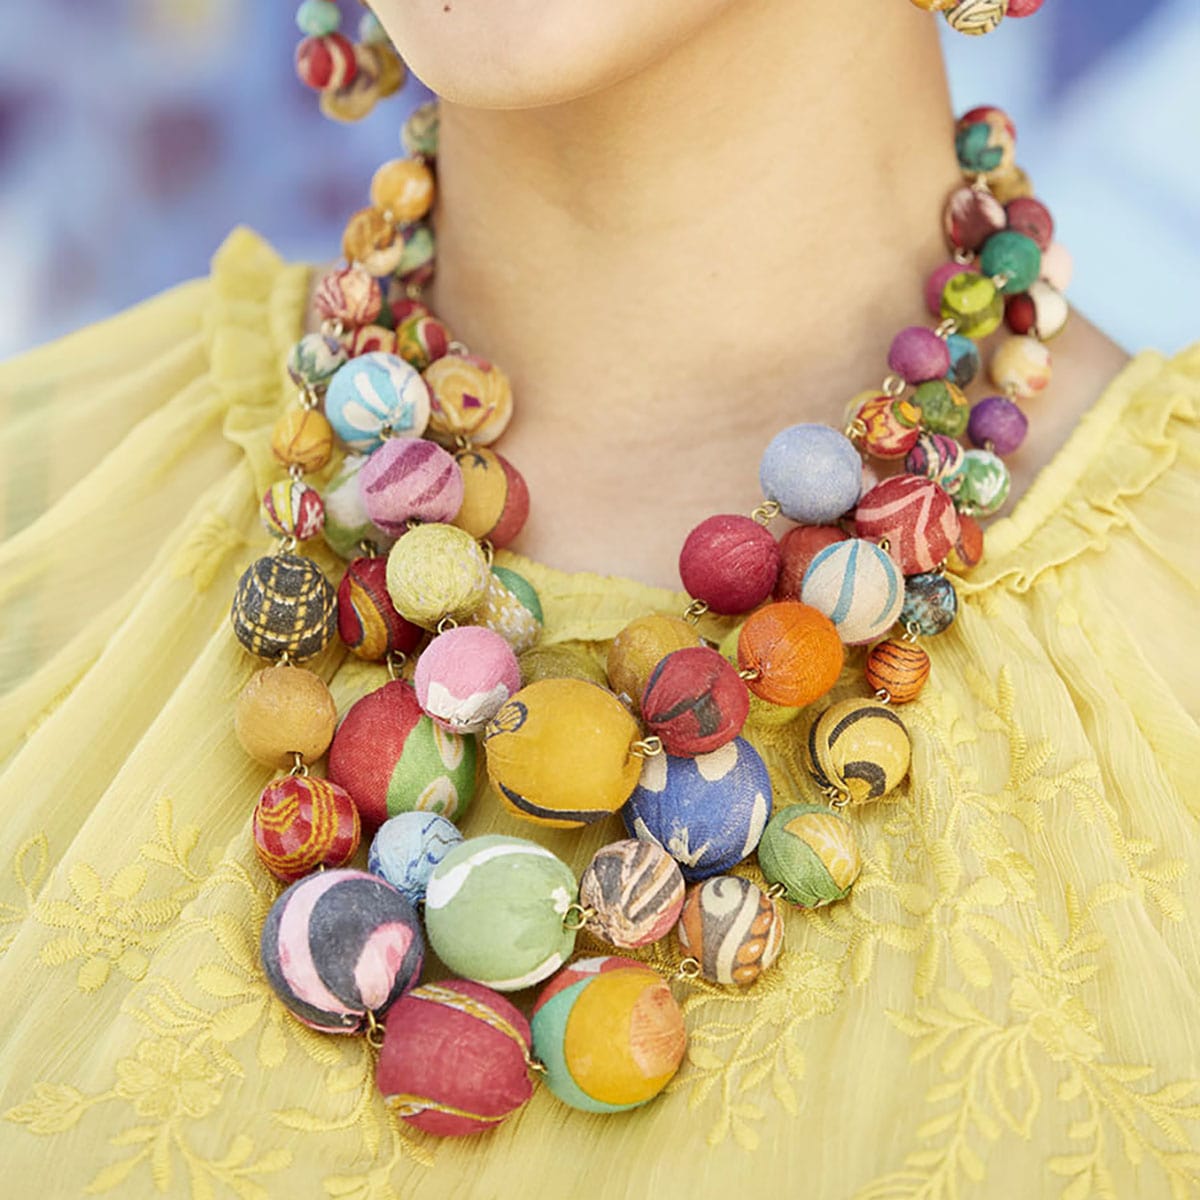 A close up image of a woman's necklace, which is multicolored, layered and beaded.